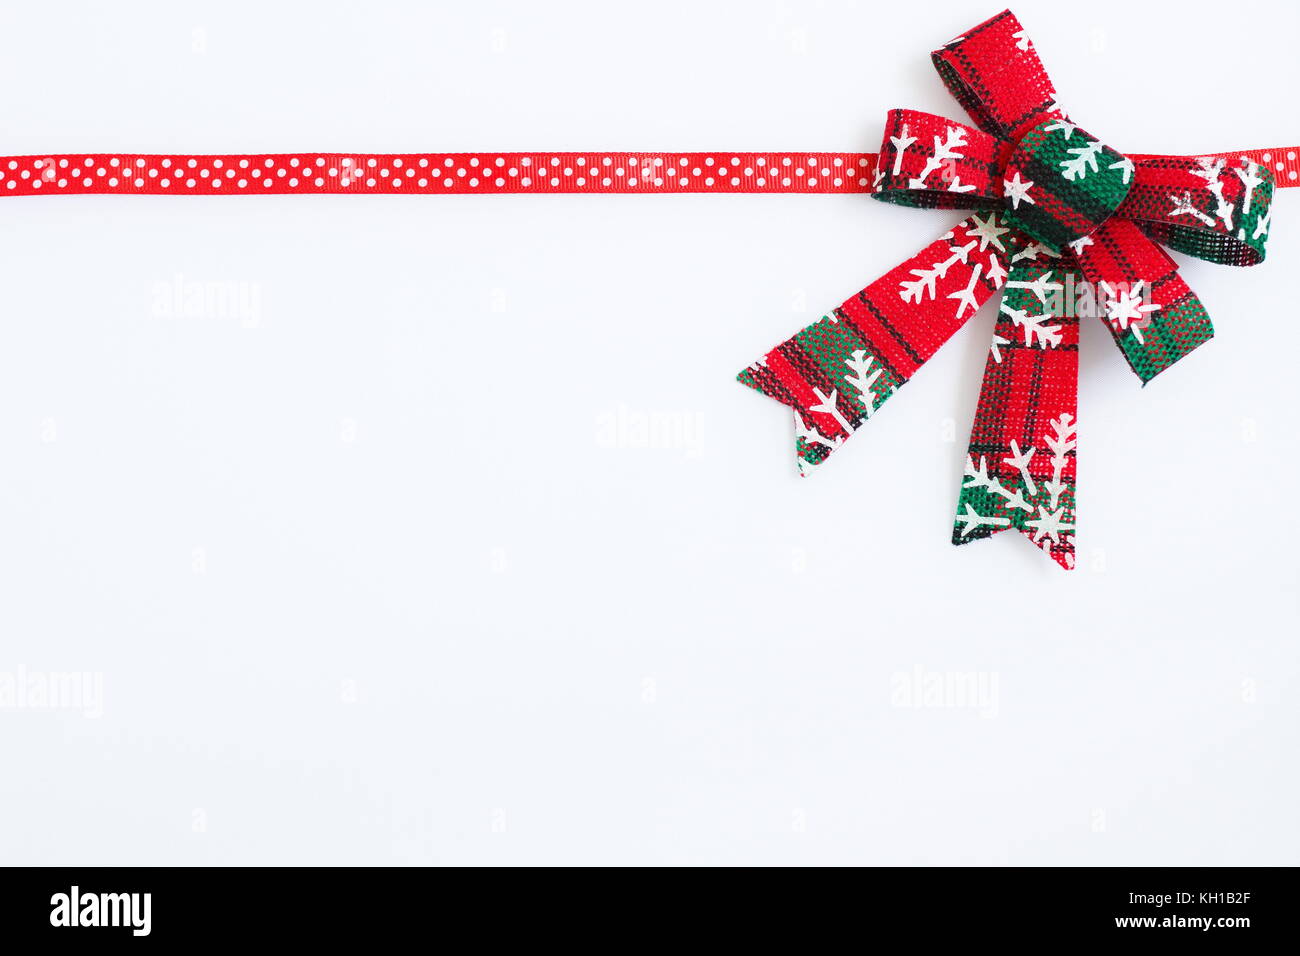 Curling Ribbon - Red Gift Wrapping Band on White Background Stock Image -  Image of present, grift: 133684839